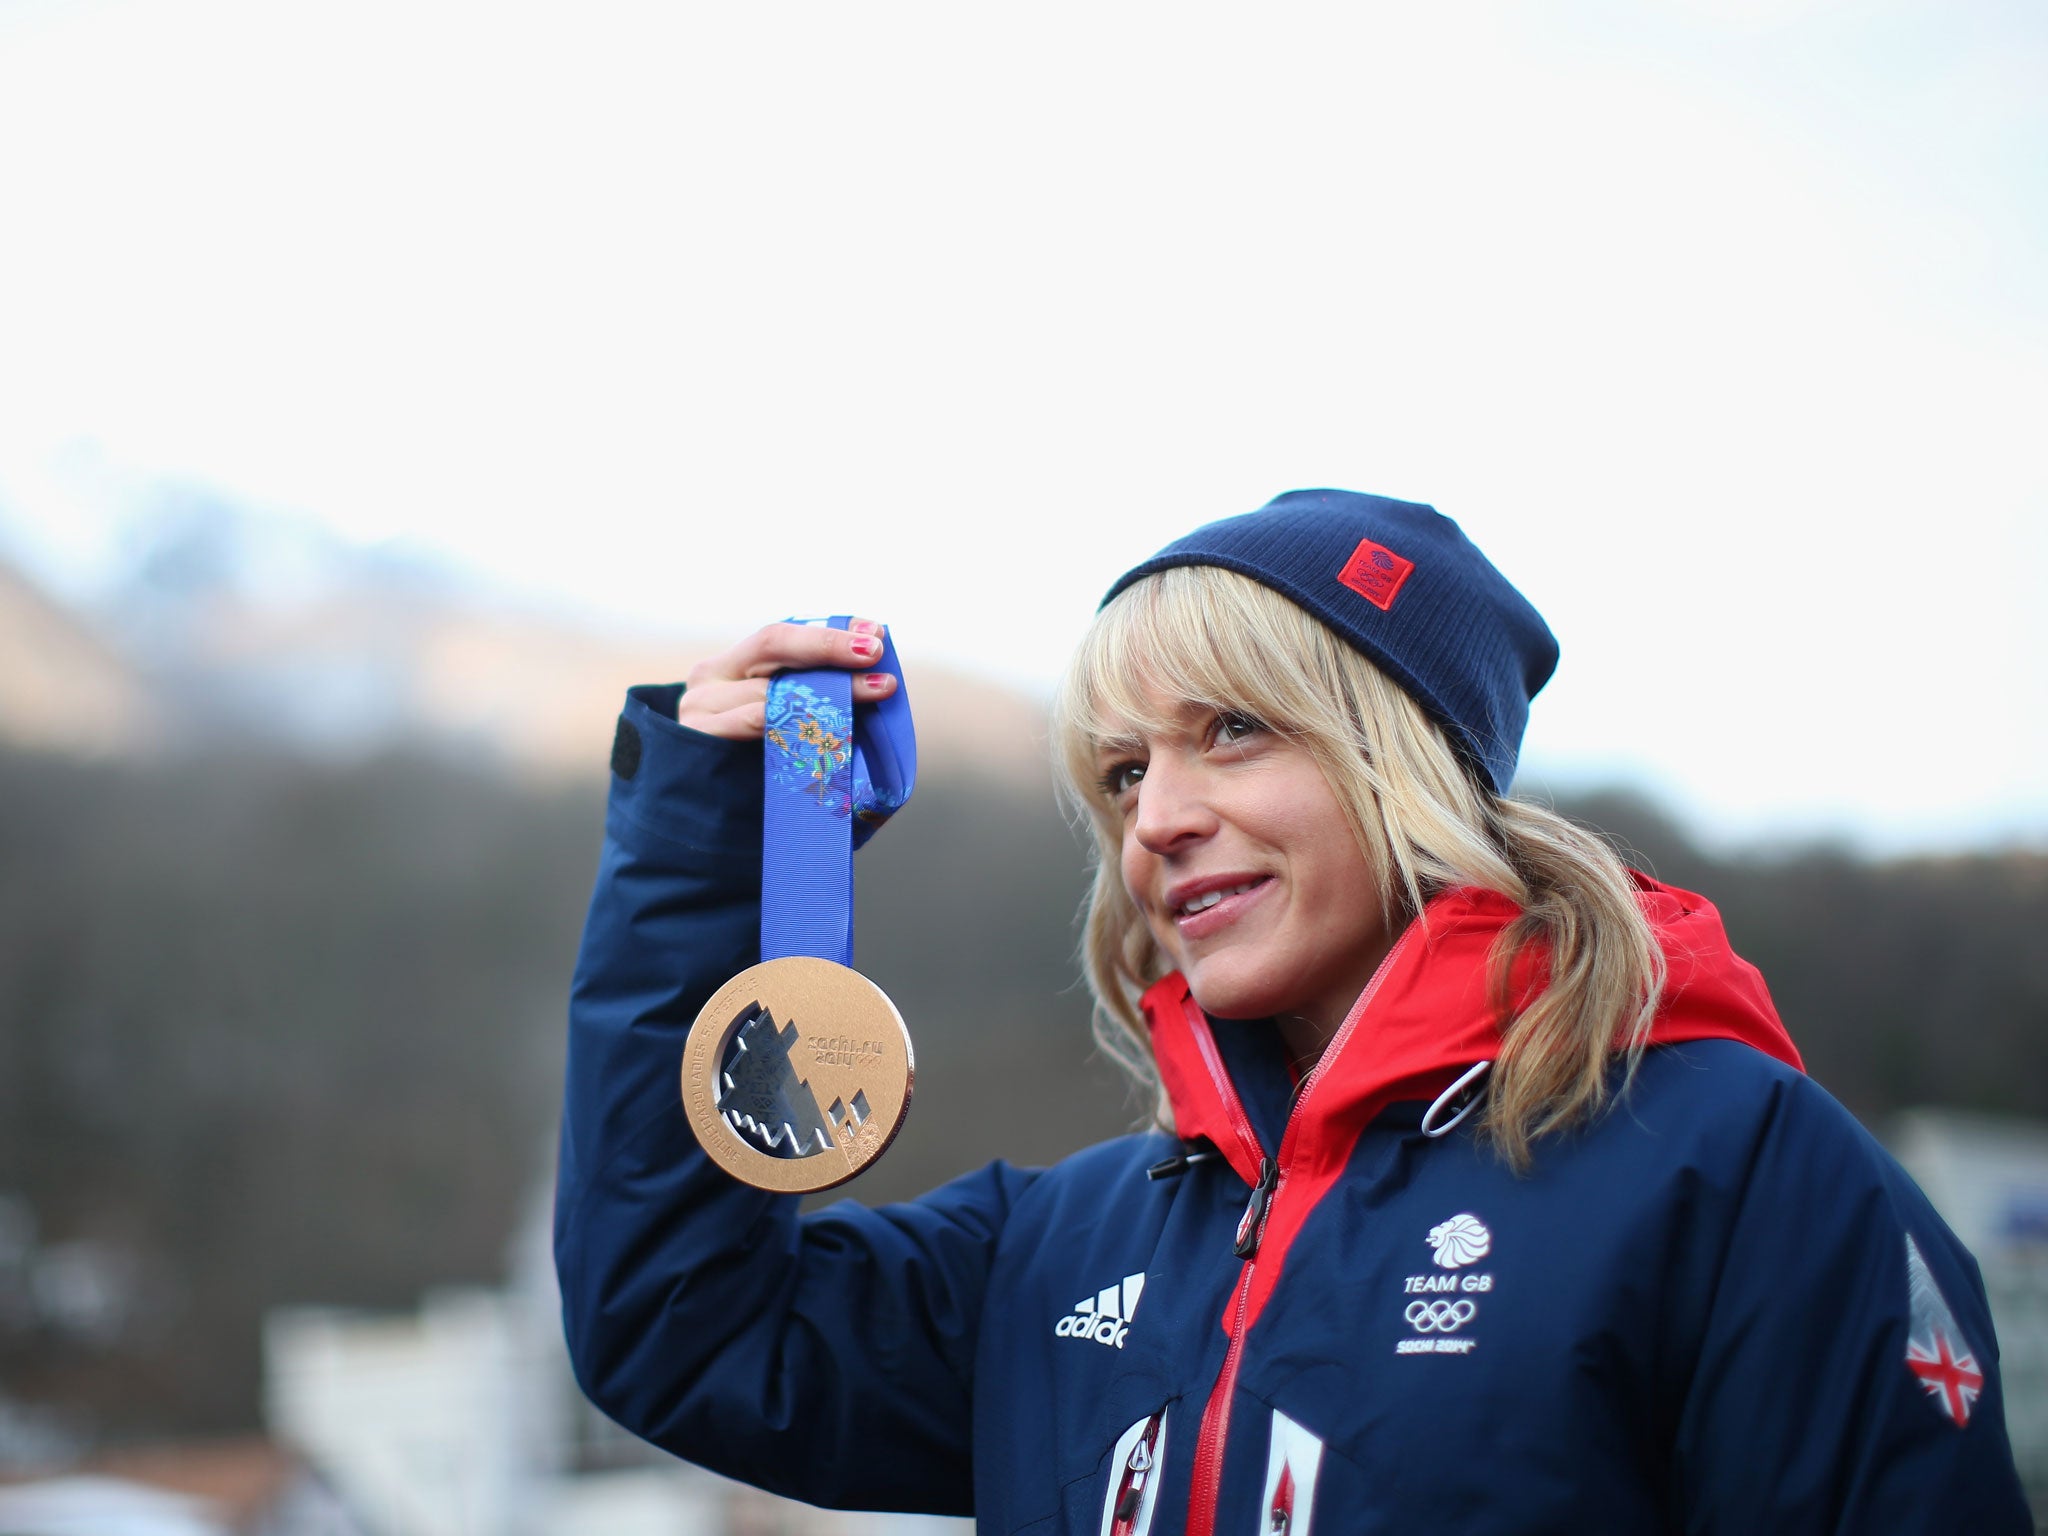 British snowboarder Jenny Jones became the first Brit to win a medal on snow